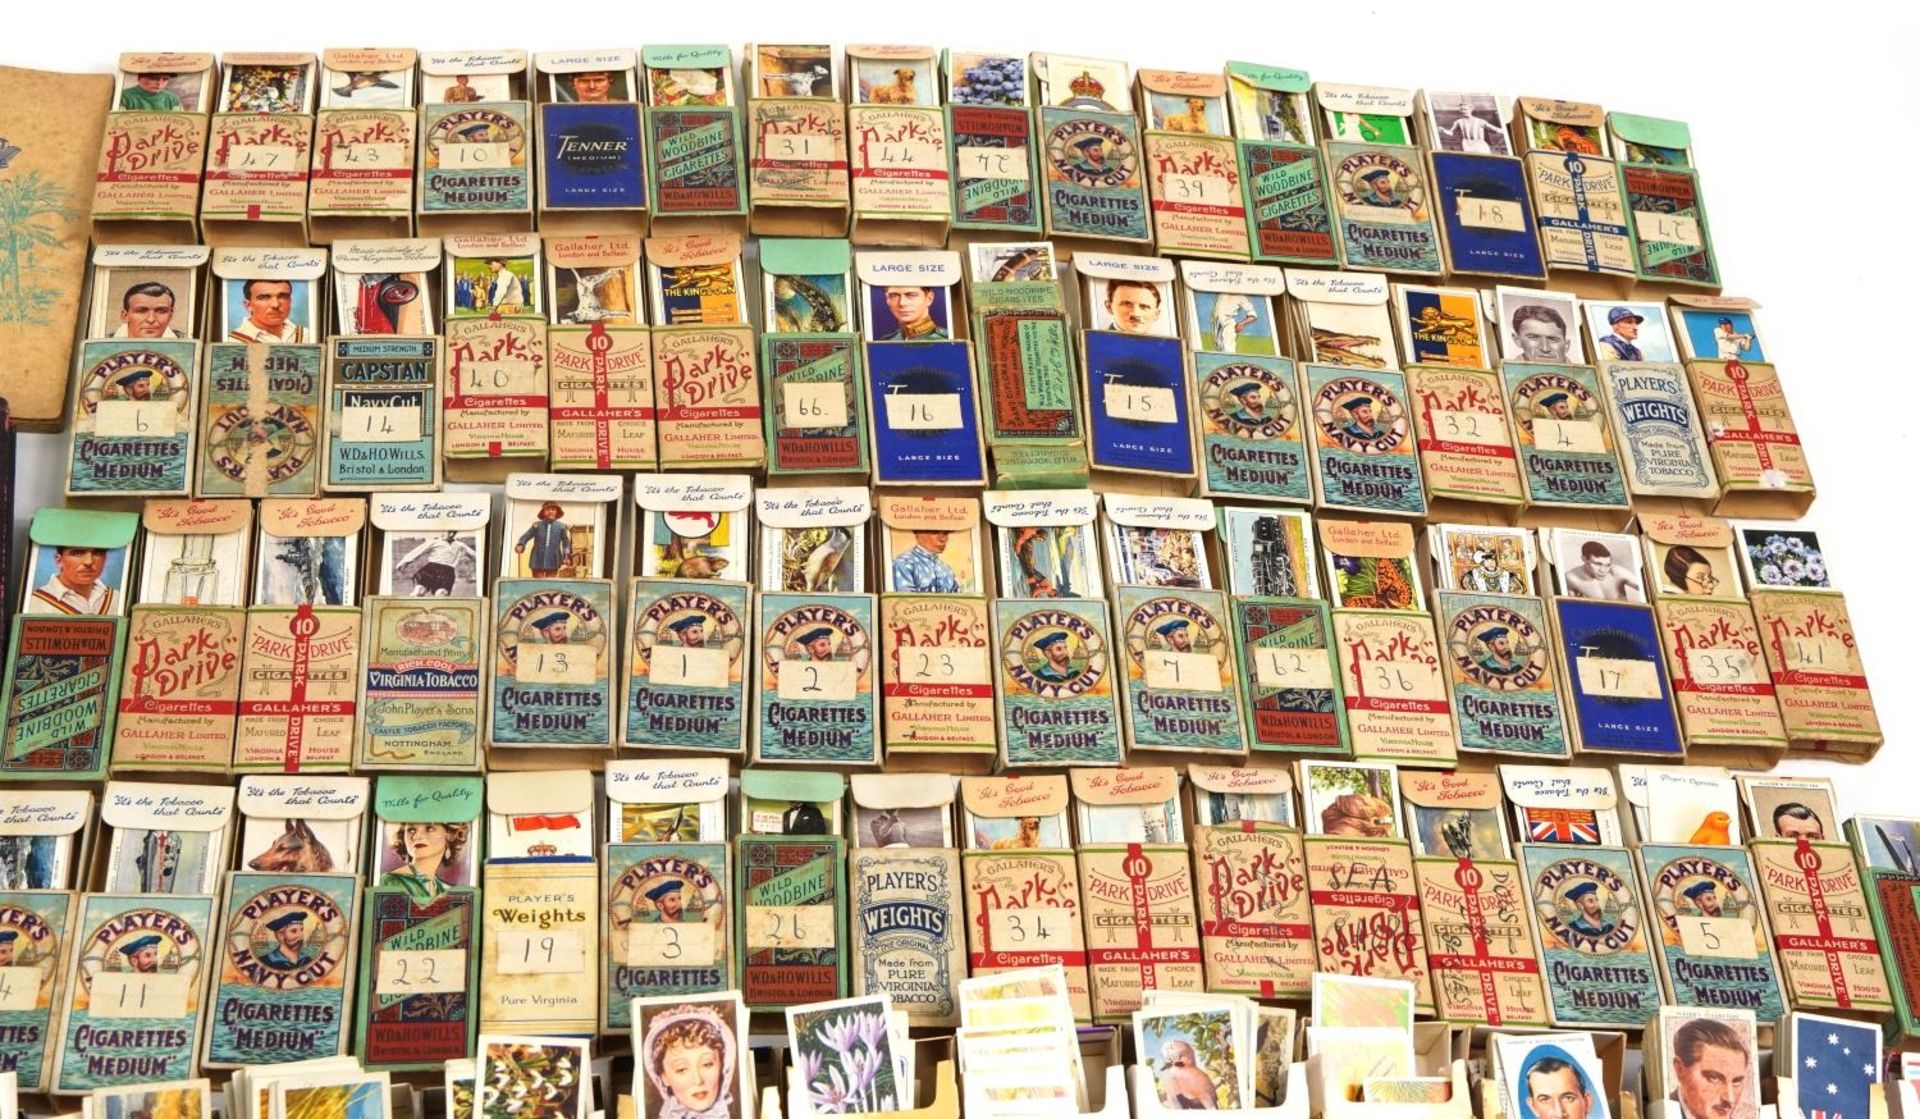 Extensive collection of cigarette and tea cards, some arranged in albums including Brooke Bond - Image 4 of 11